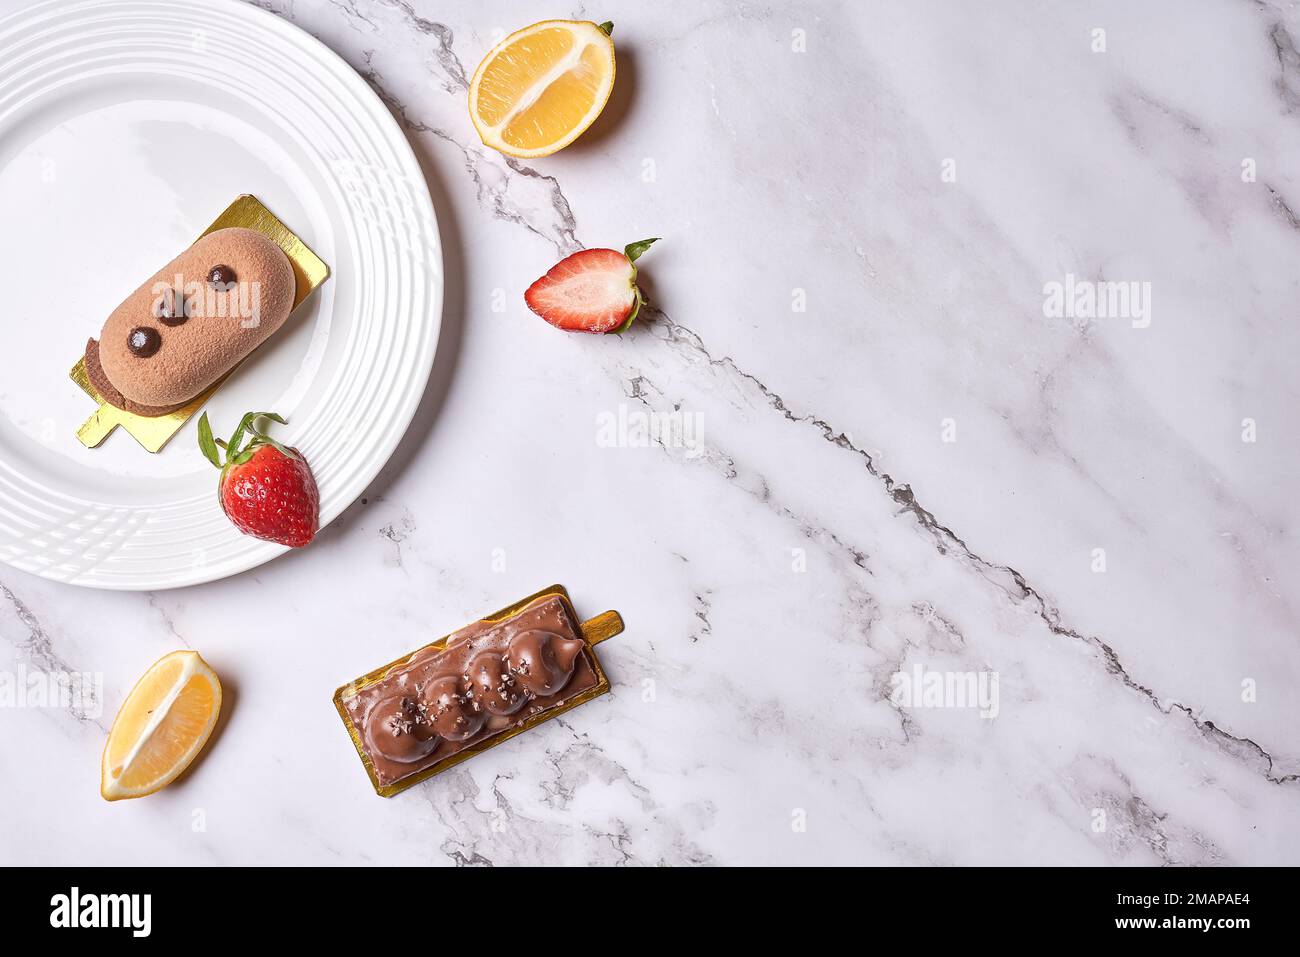 some desserts on a white plate with strawberries and lemon slices next to the plate is a piece of cake Stock Photo